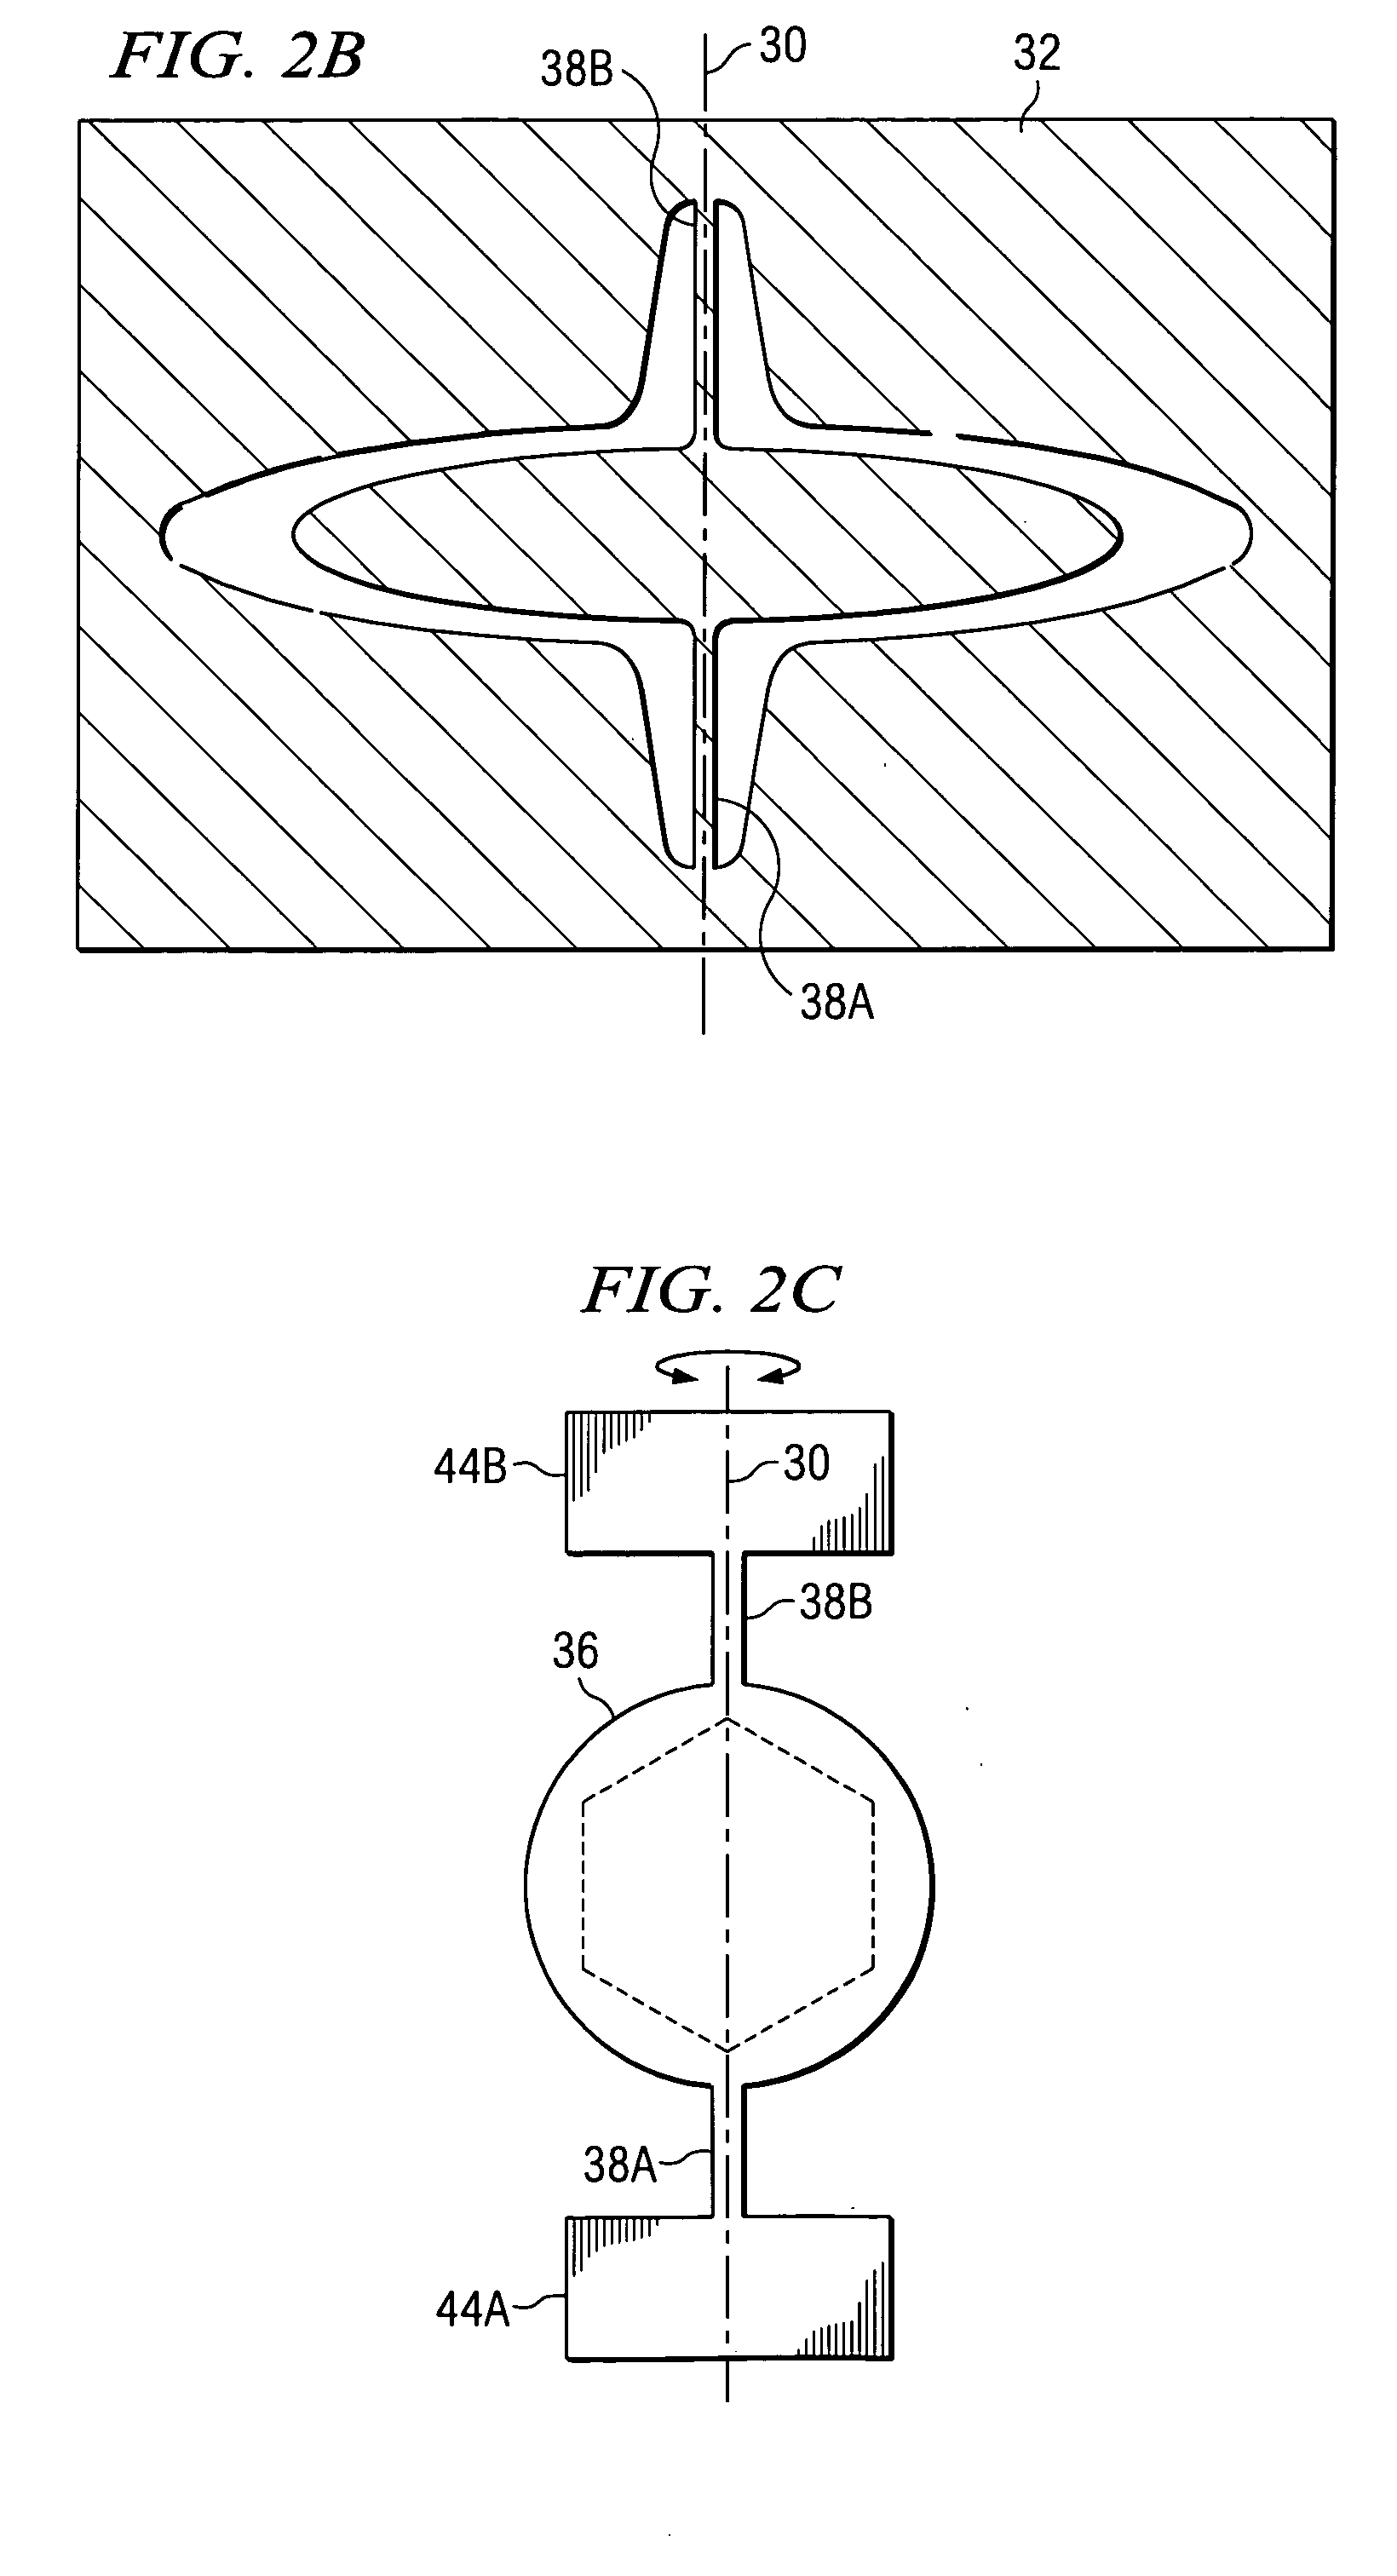 Apparatus and methods for adjusting the rotational frequency of a scanning device